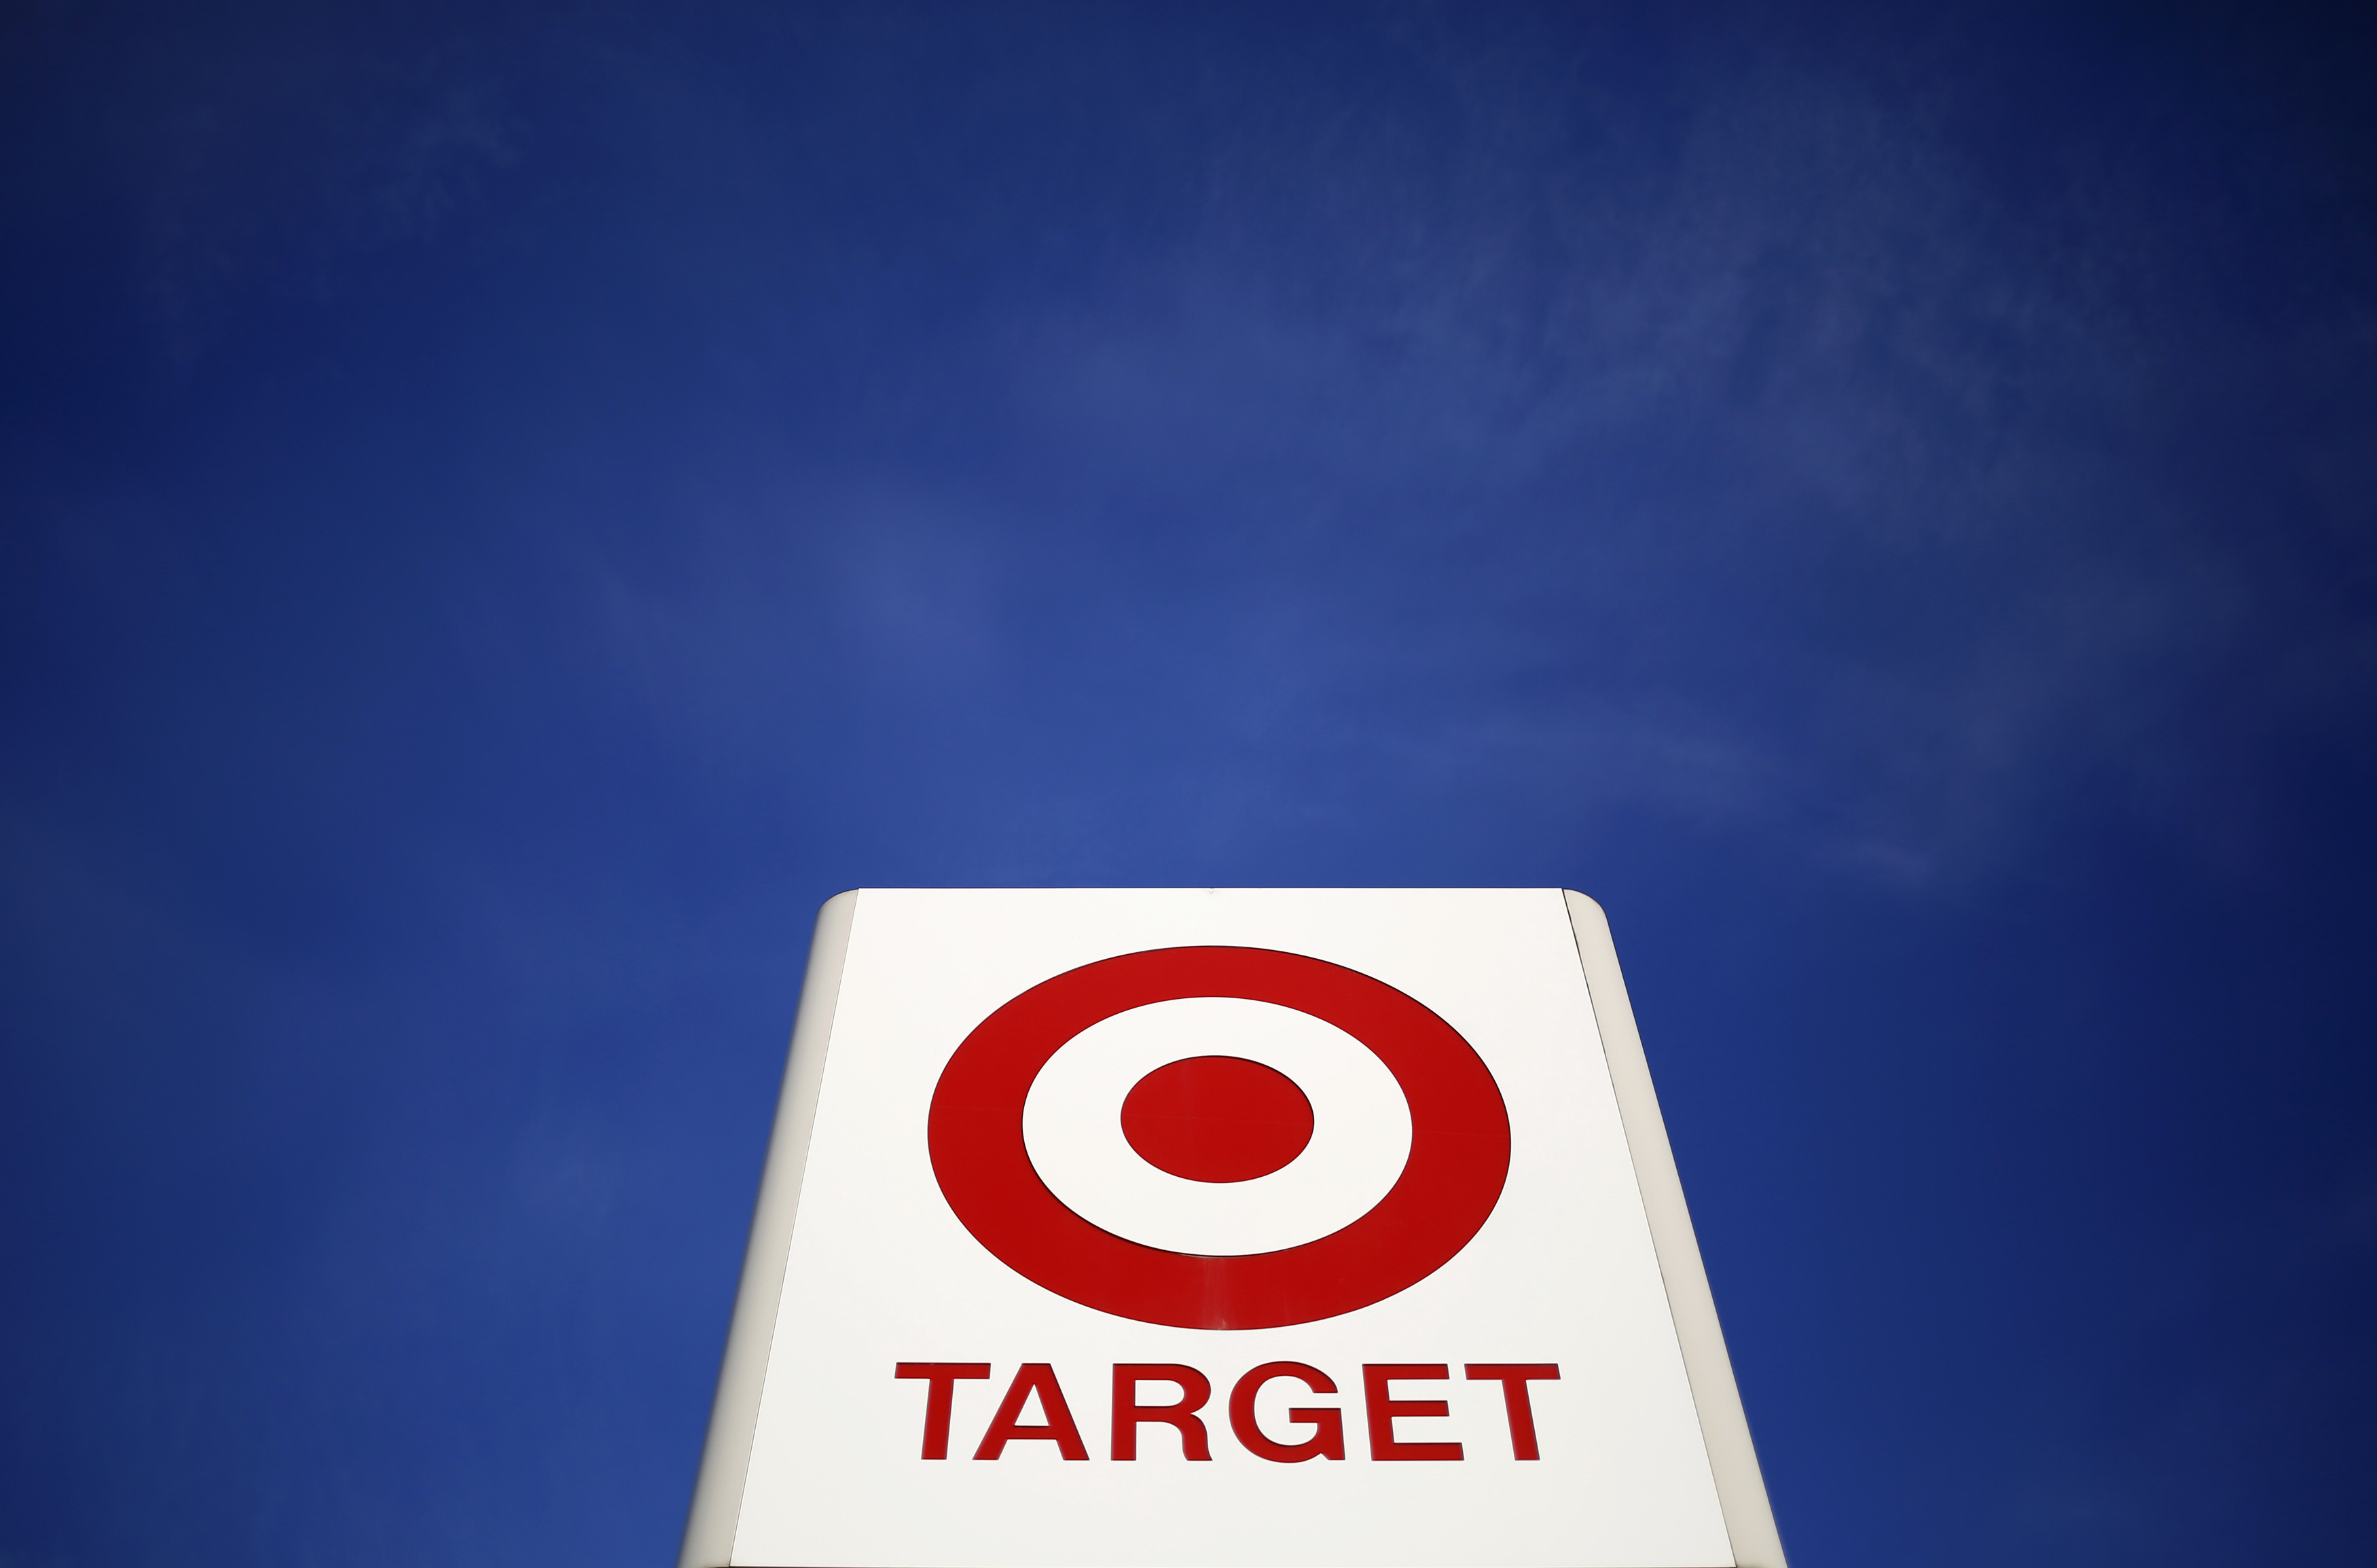 Target Pride Month collection released to mixed reviews